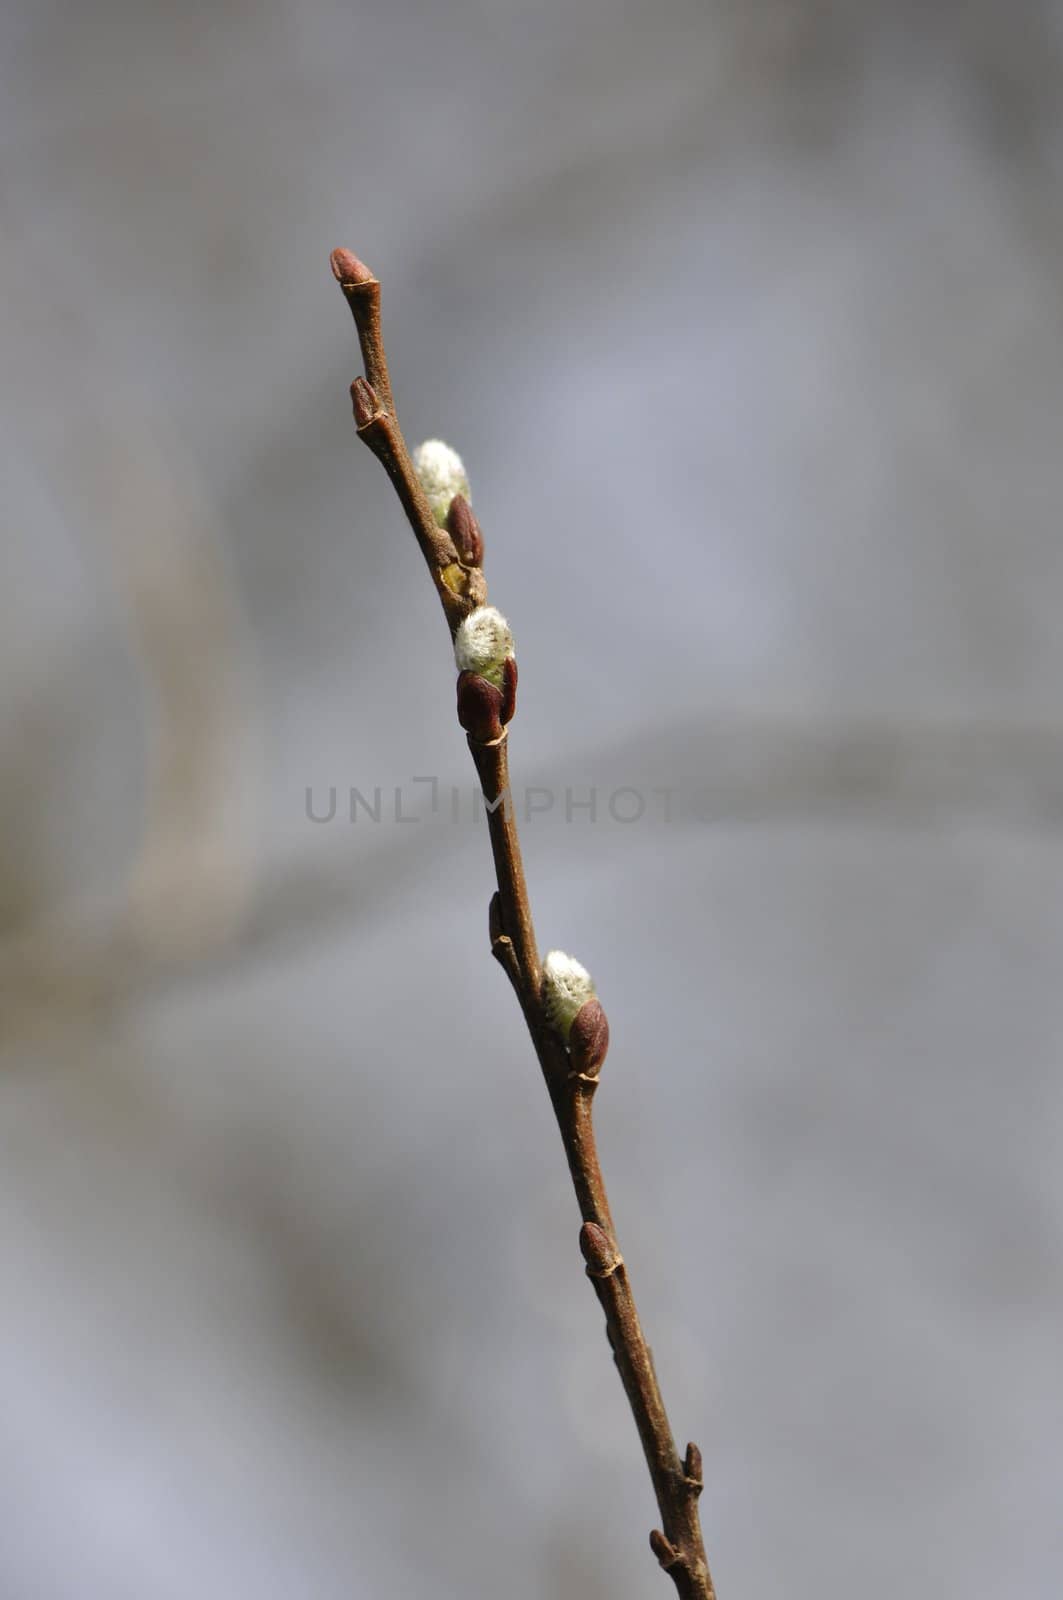 Three young buds on one small branch with a blurred background